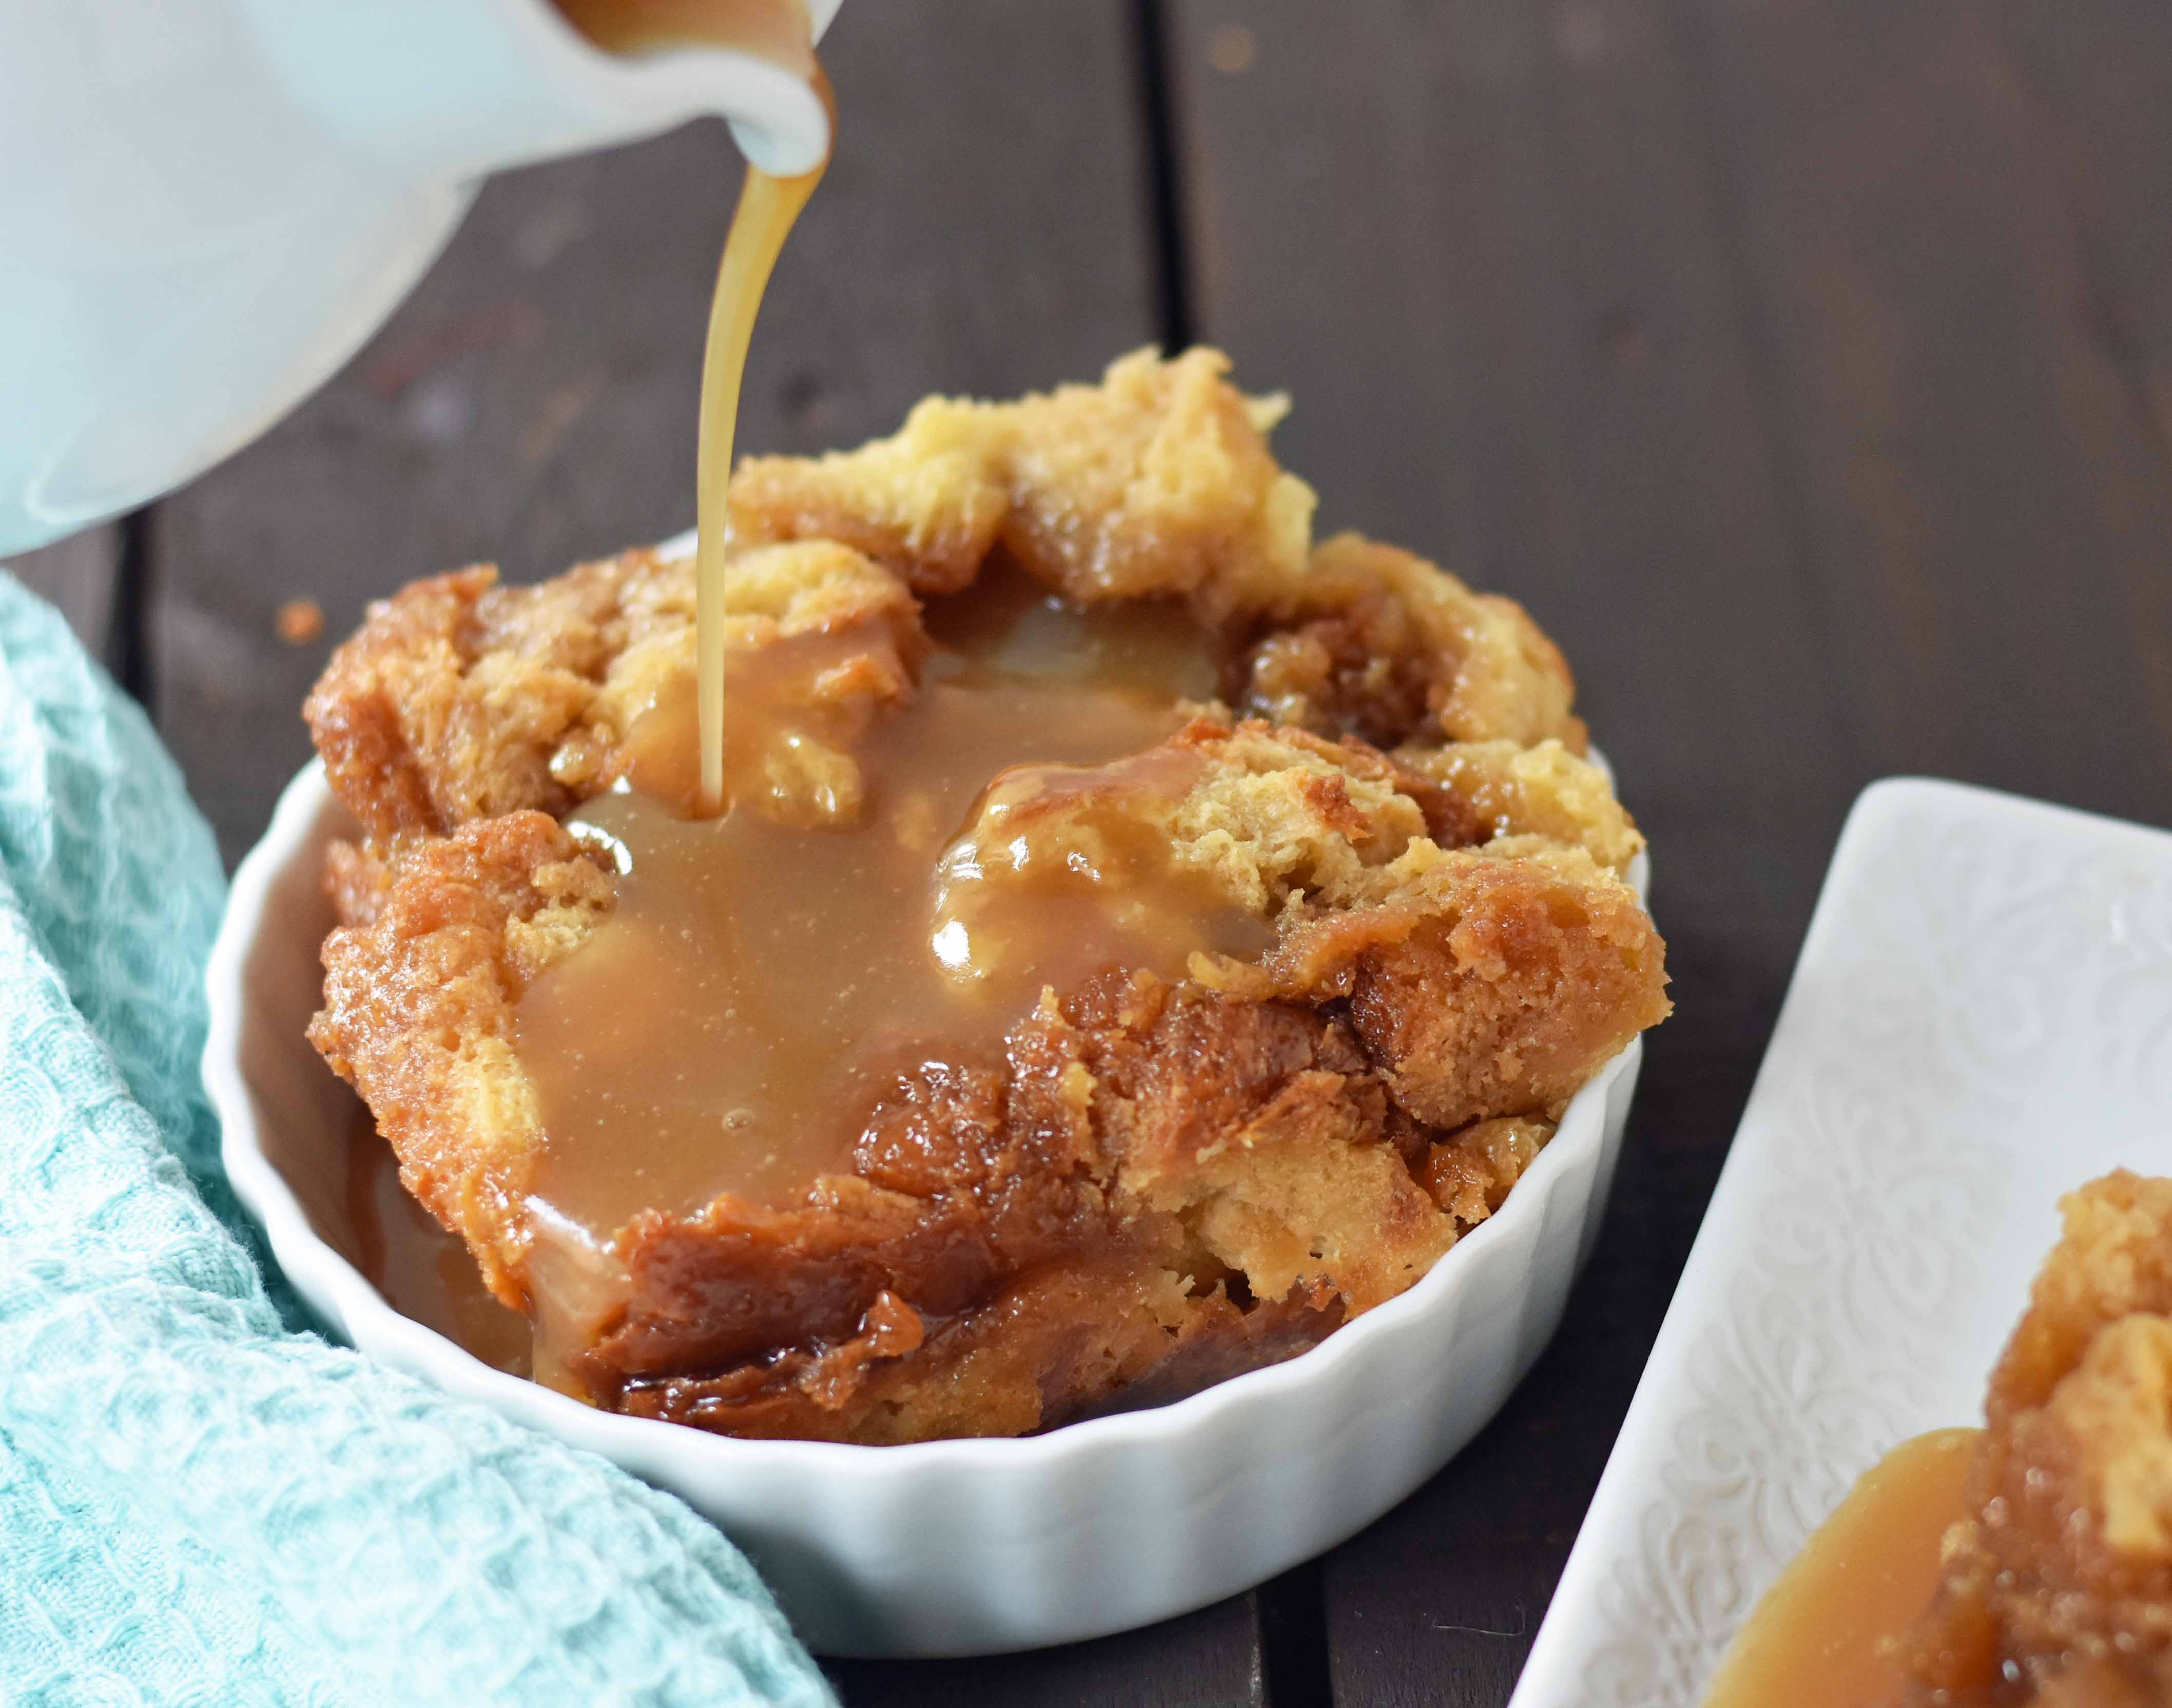 Salted Caramel Bread Pudding made with brioche or challah bread and baked in half-n-half, eggs, brown sugar, and vanilla. This heavenly caramel bread pudding is topped with a homemade sea salt caramel sauce. www.modernhoney.com